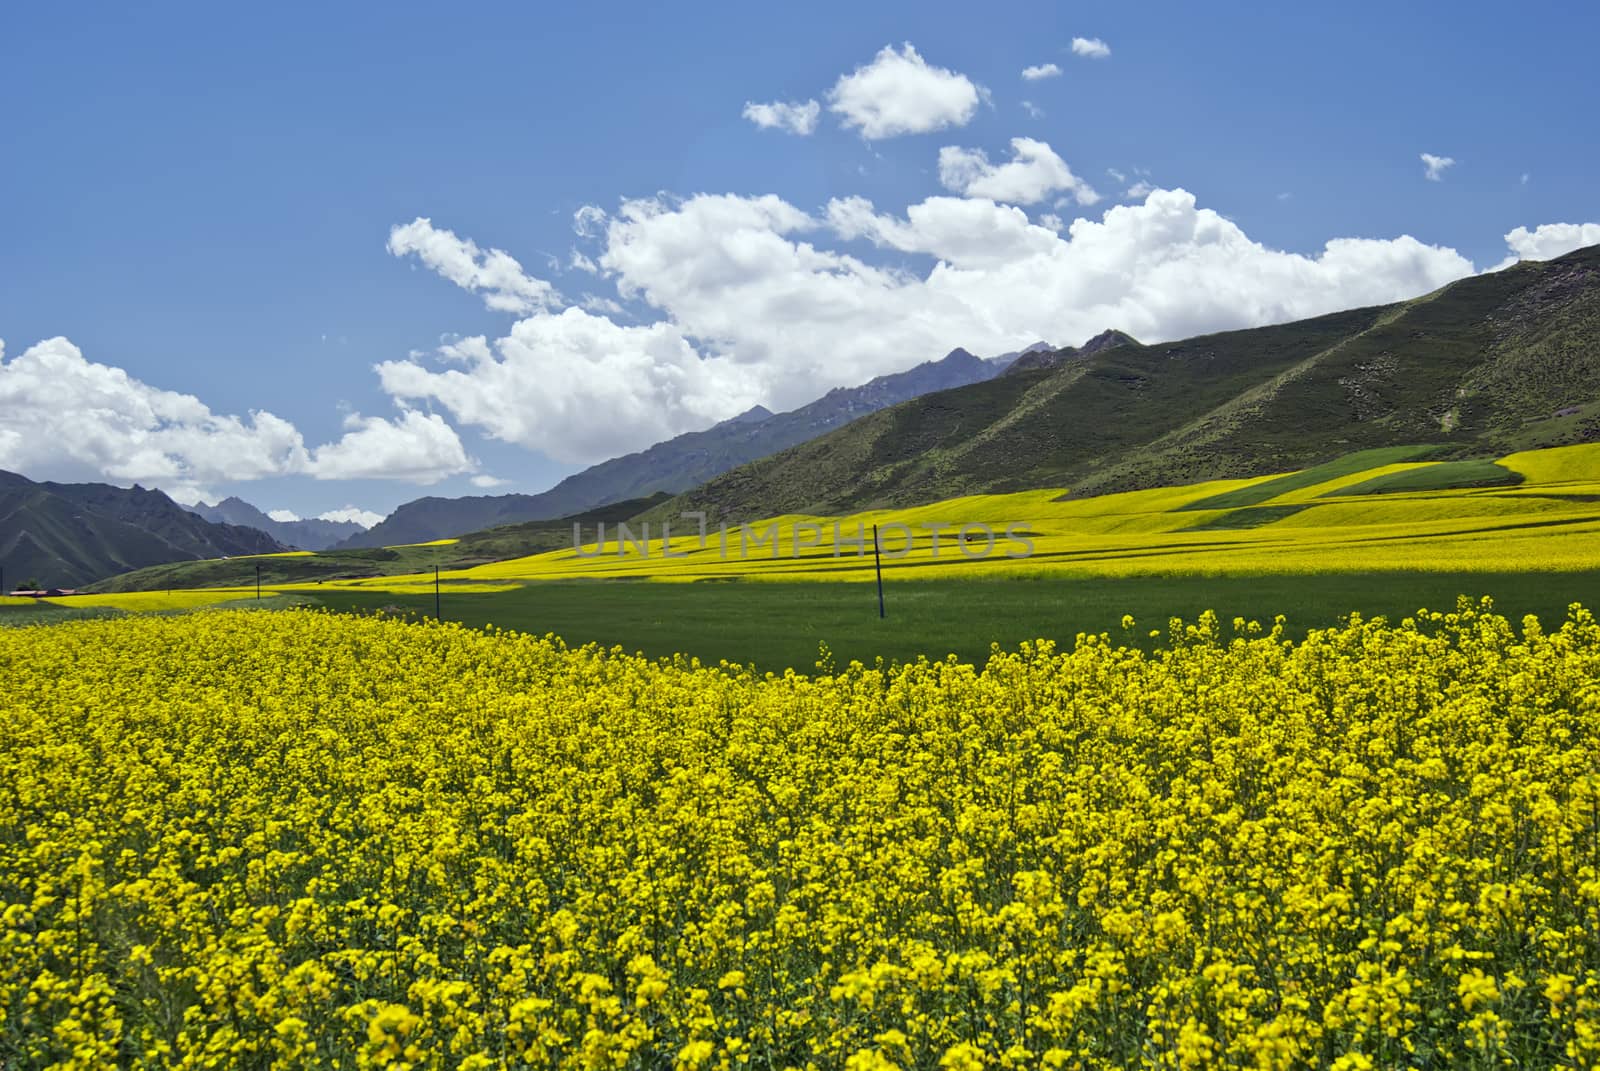 Barley and canola flower fields by xfdly5